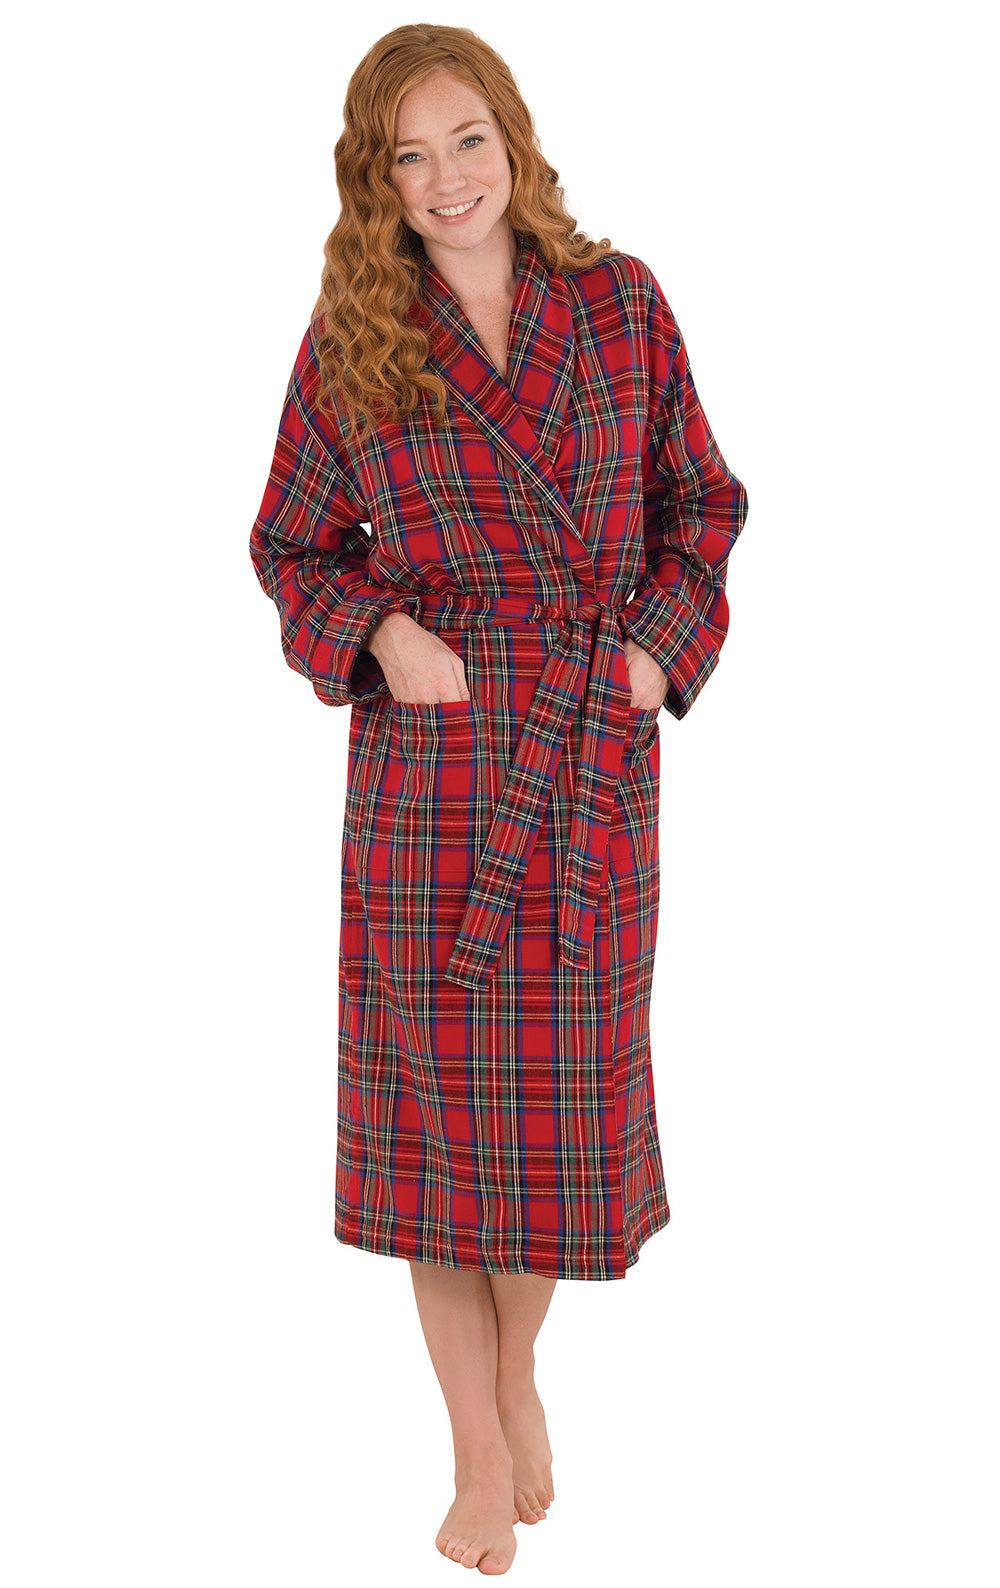 Heritage Plaid Flannel Long Robe